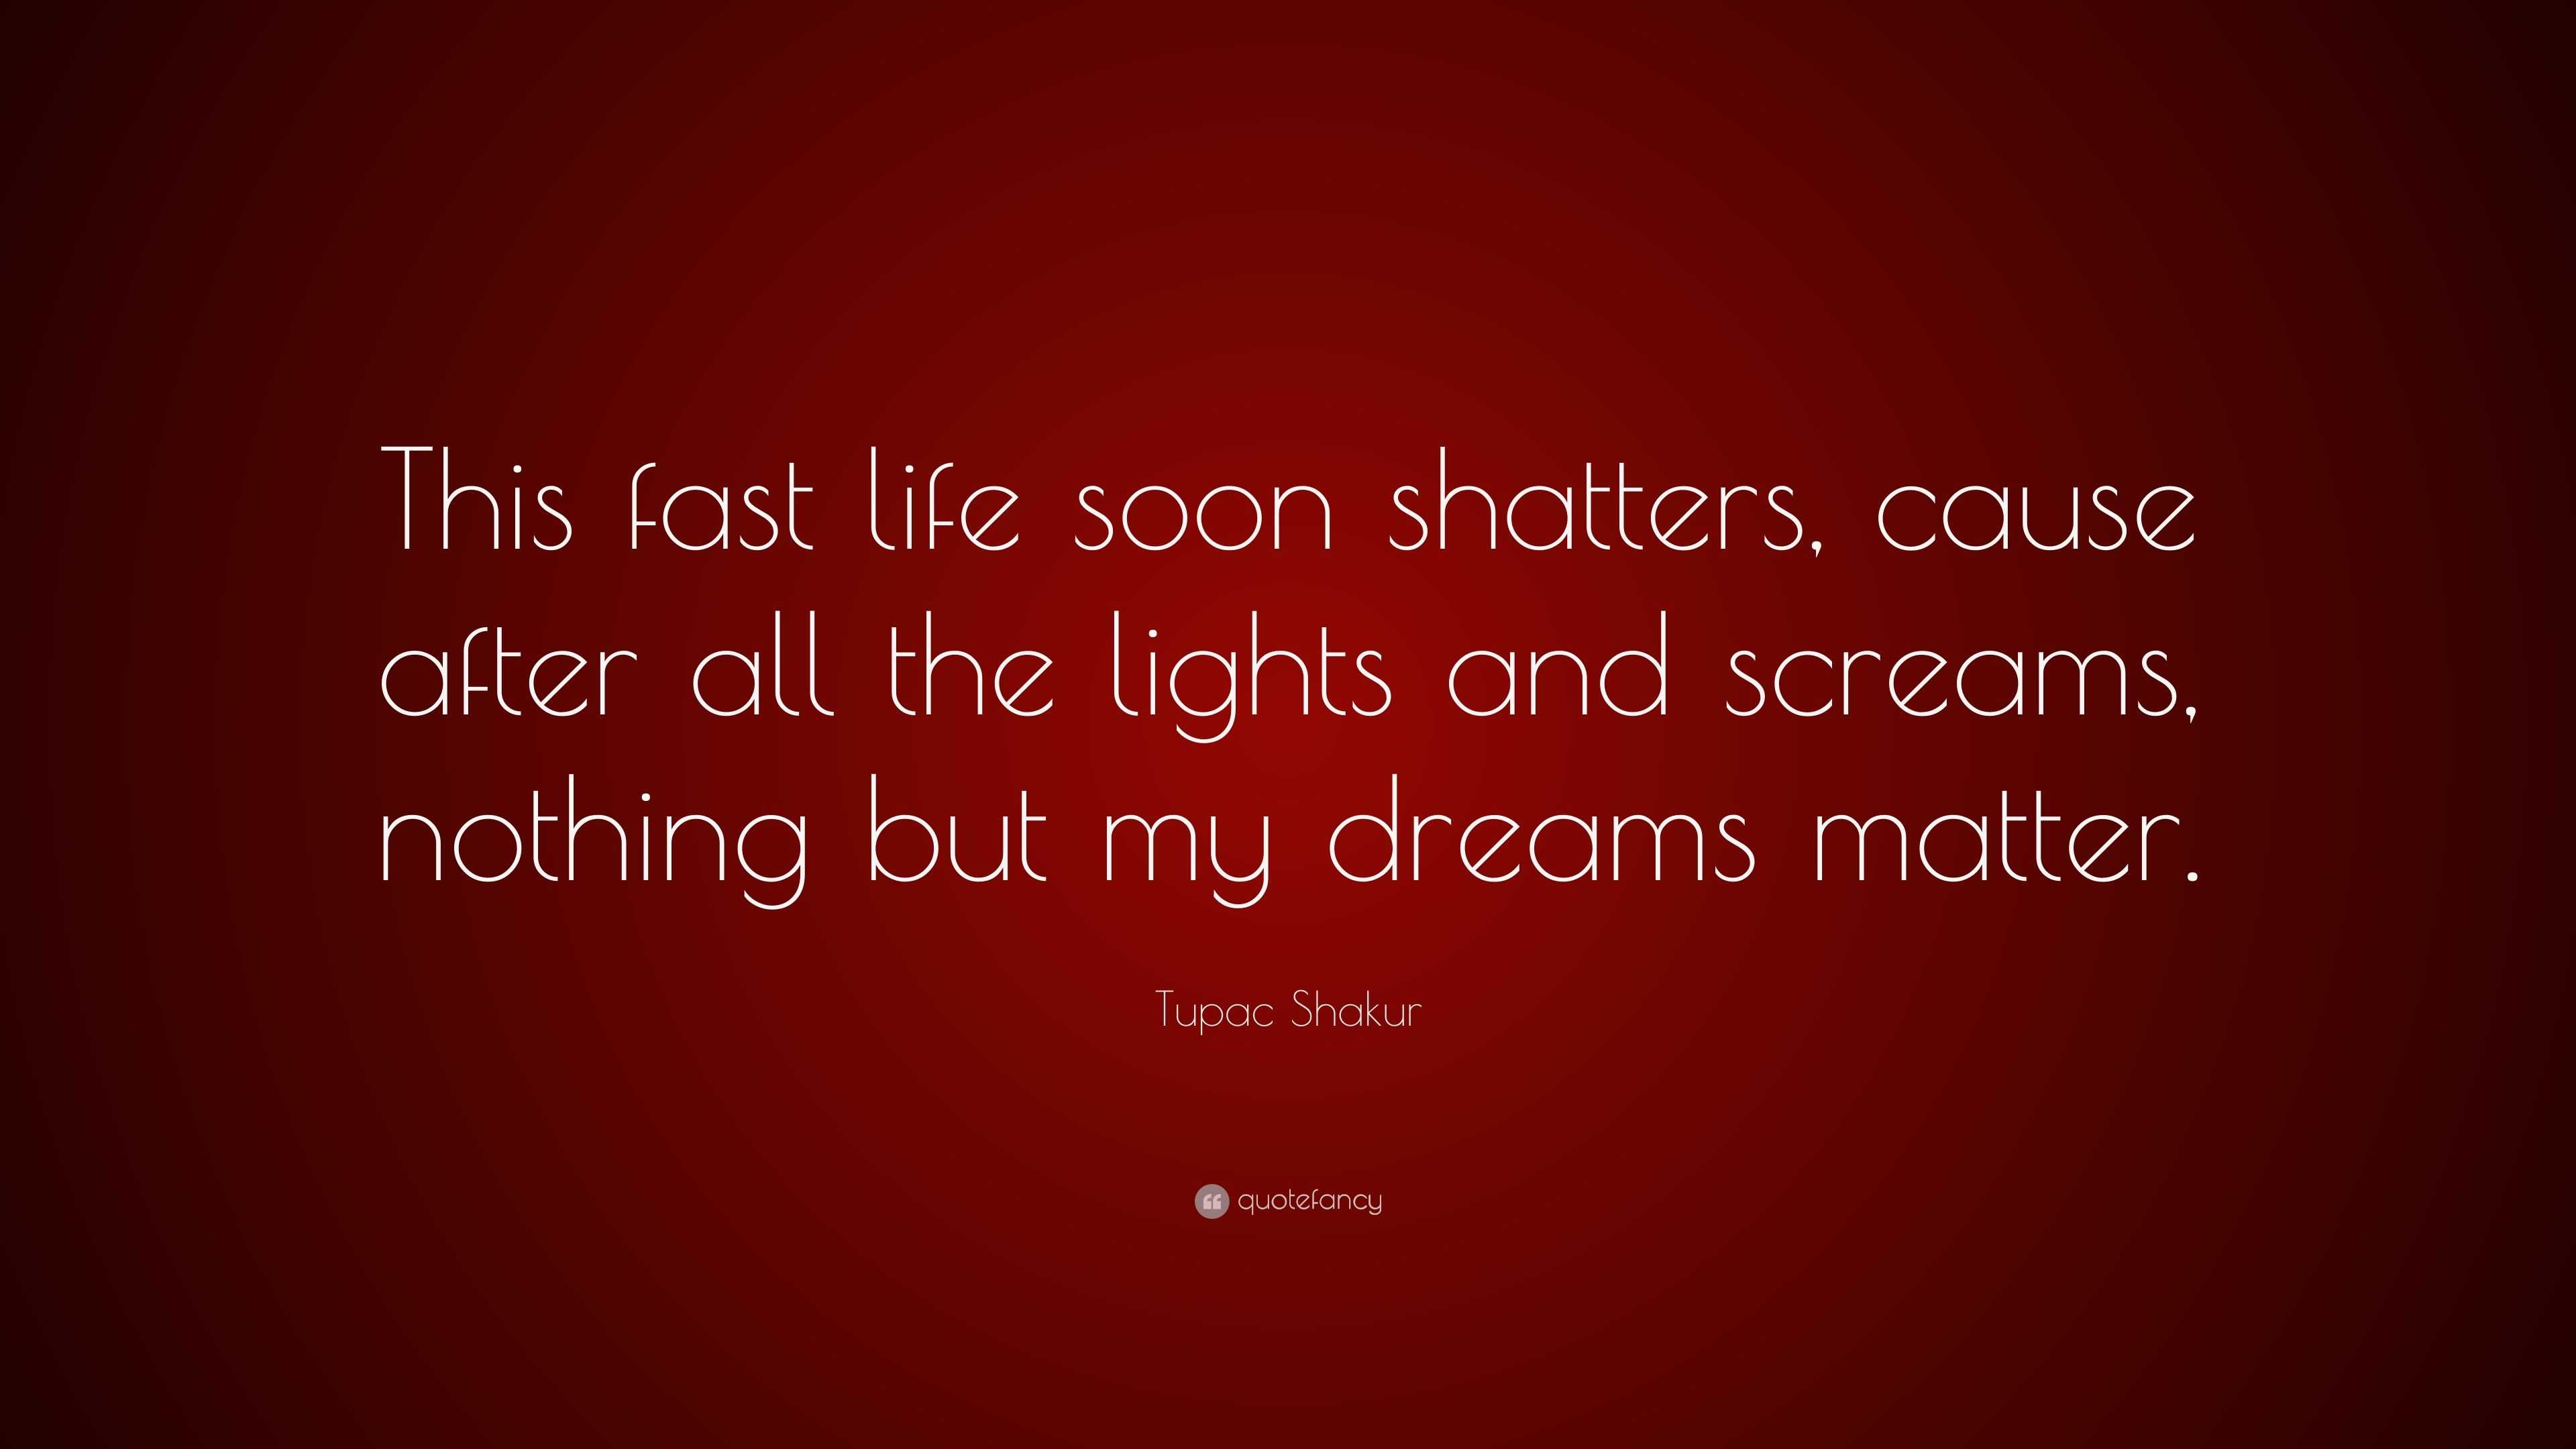 Tupac Shakur Quote: “This fast life soon shatters, cause after all the ...